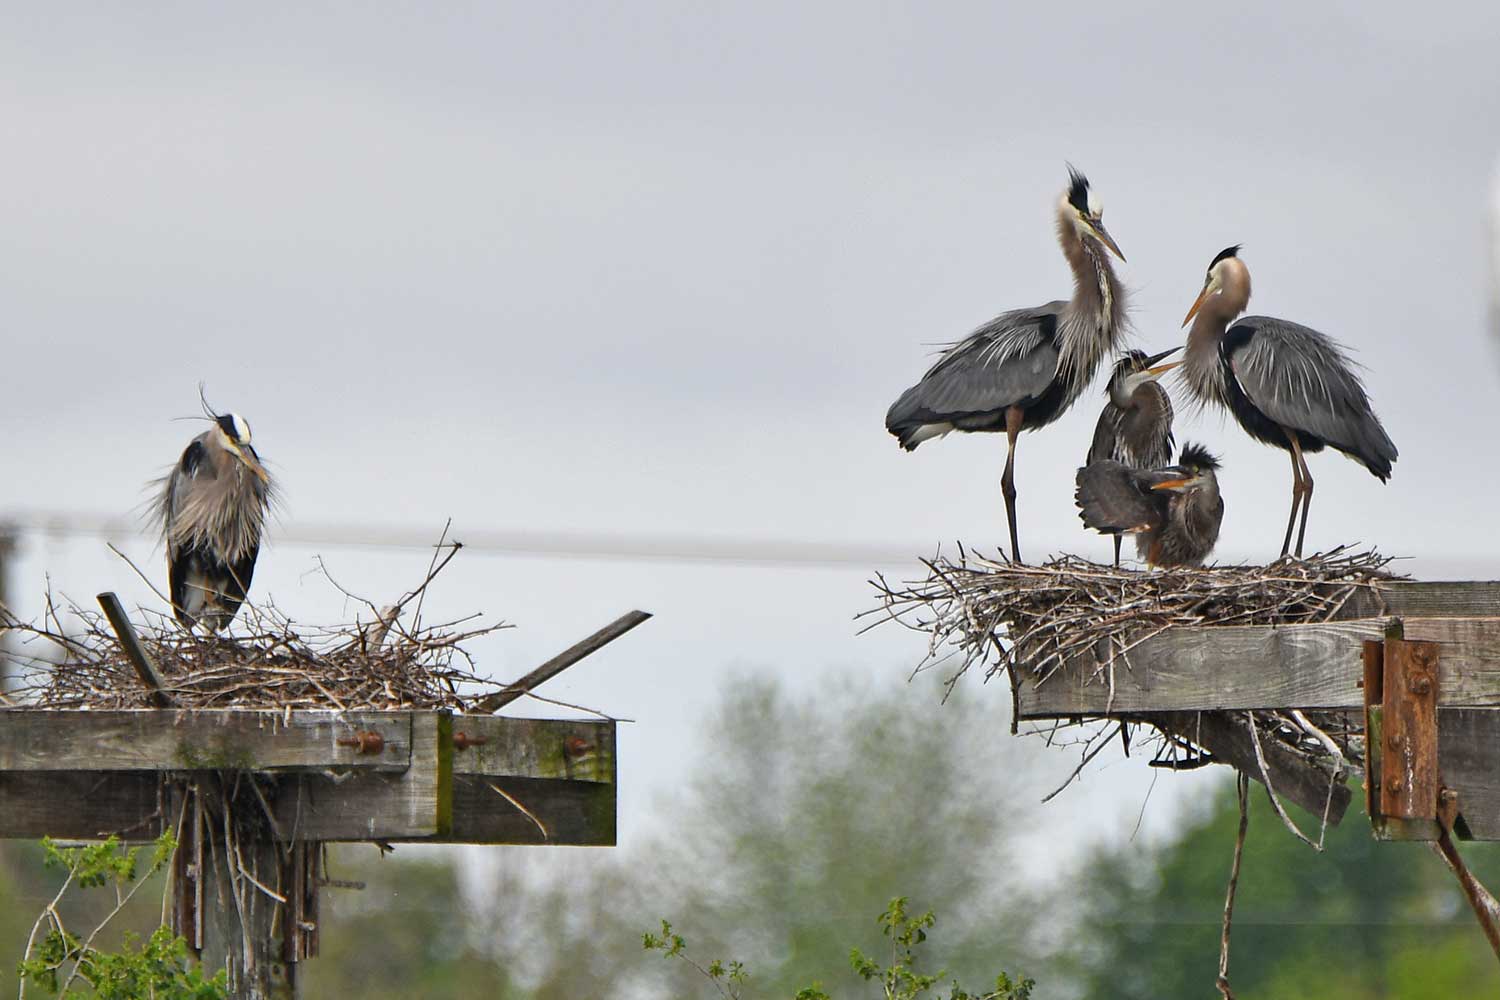 Five great blue herons perched on nesting platforms on a nesting island.